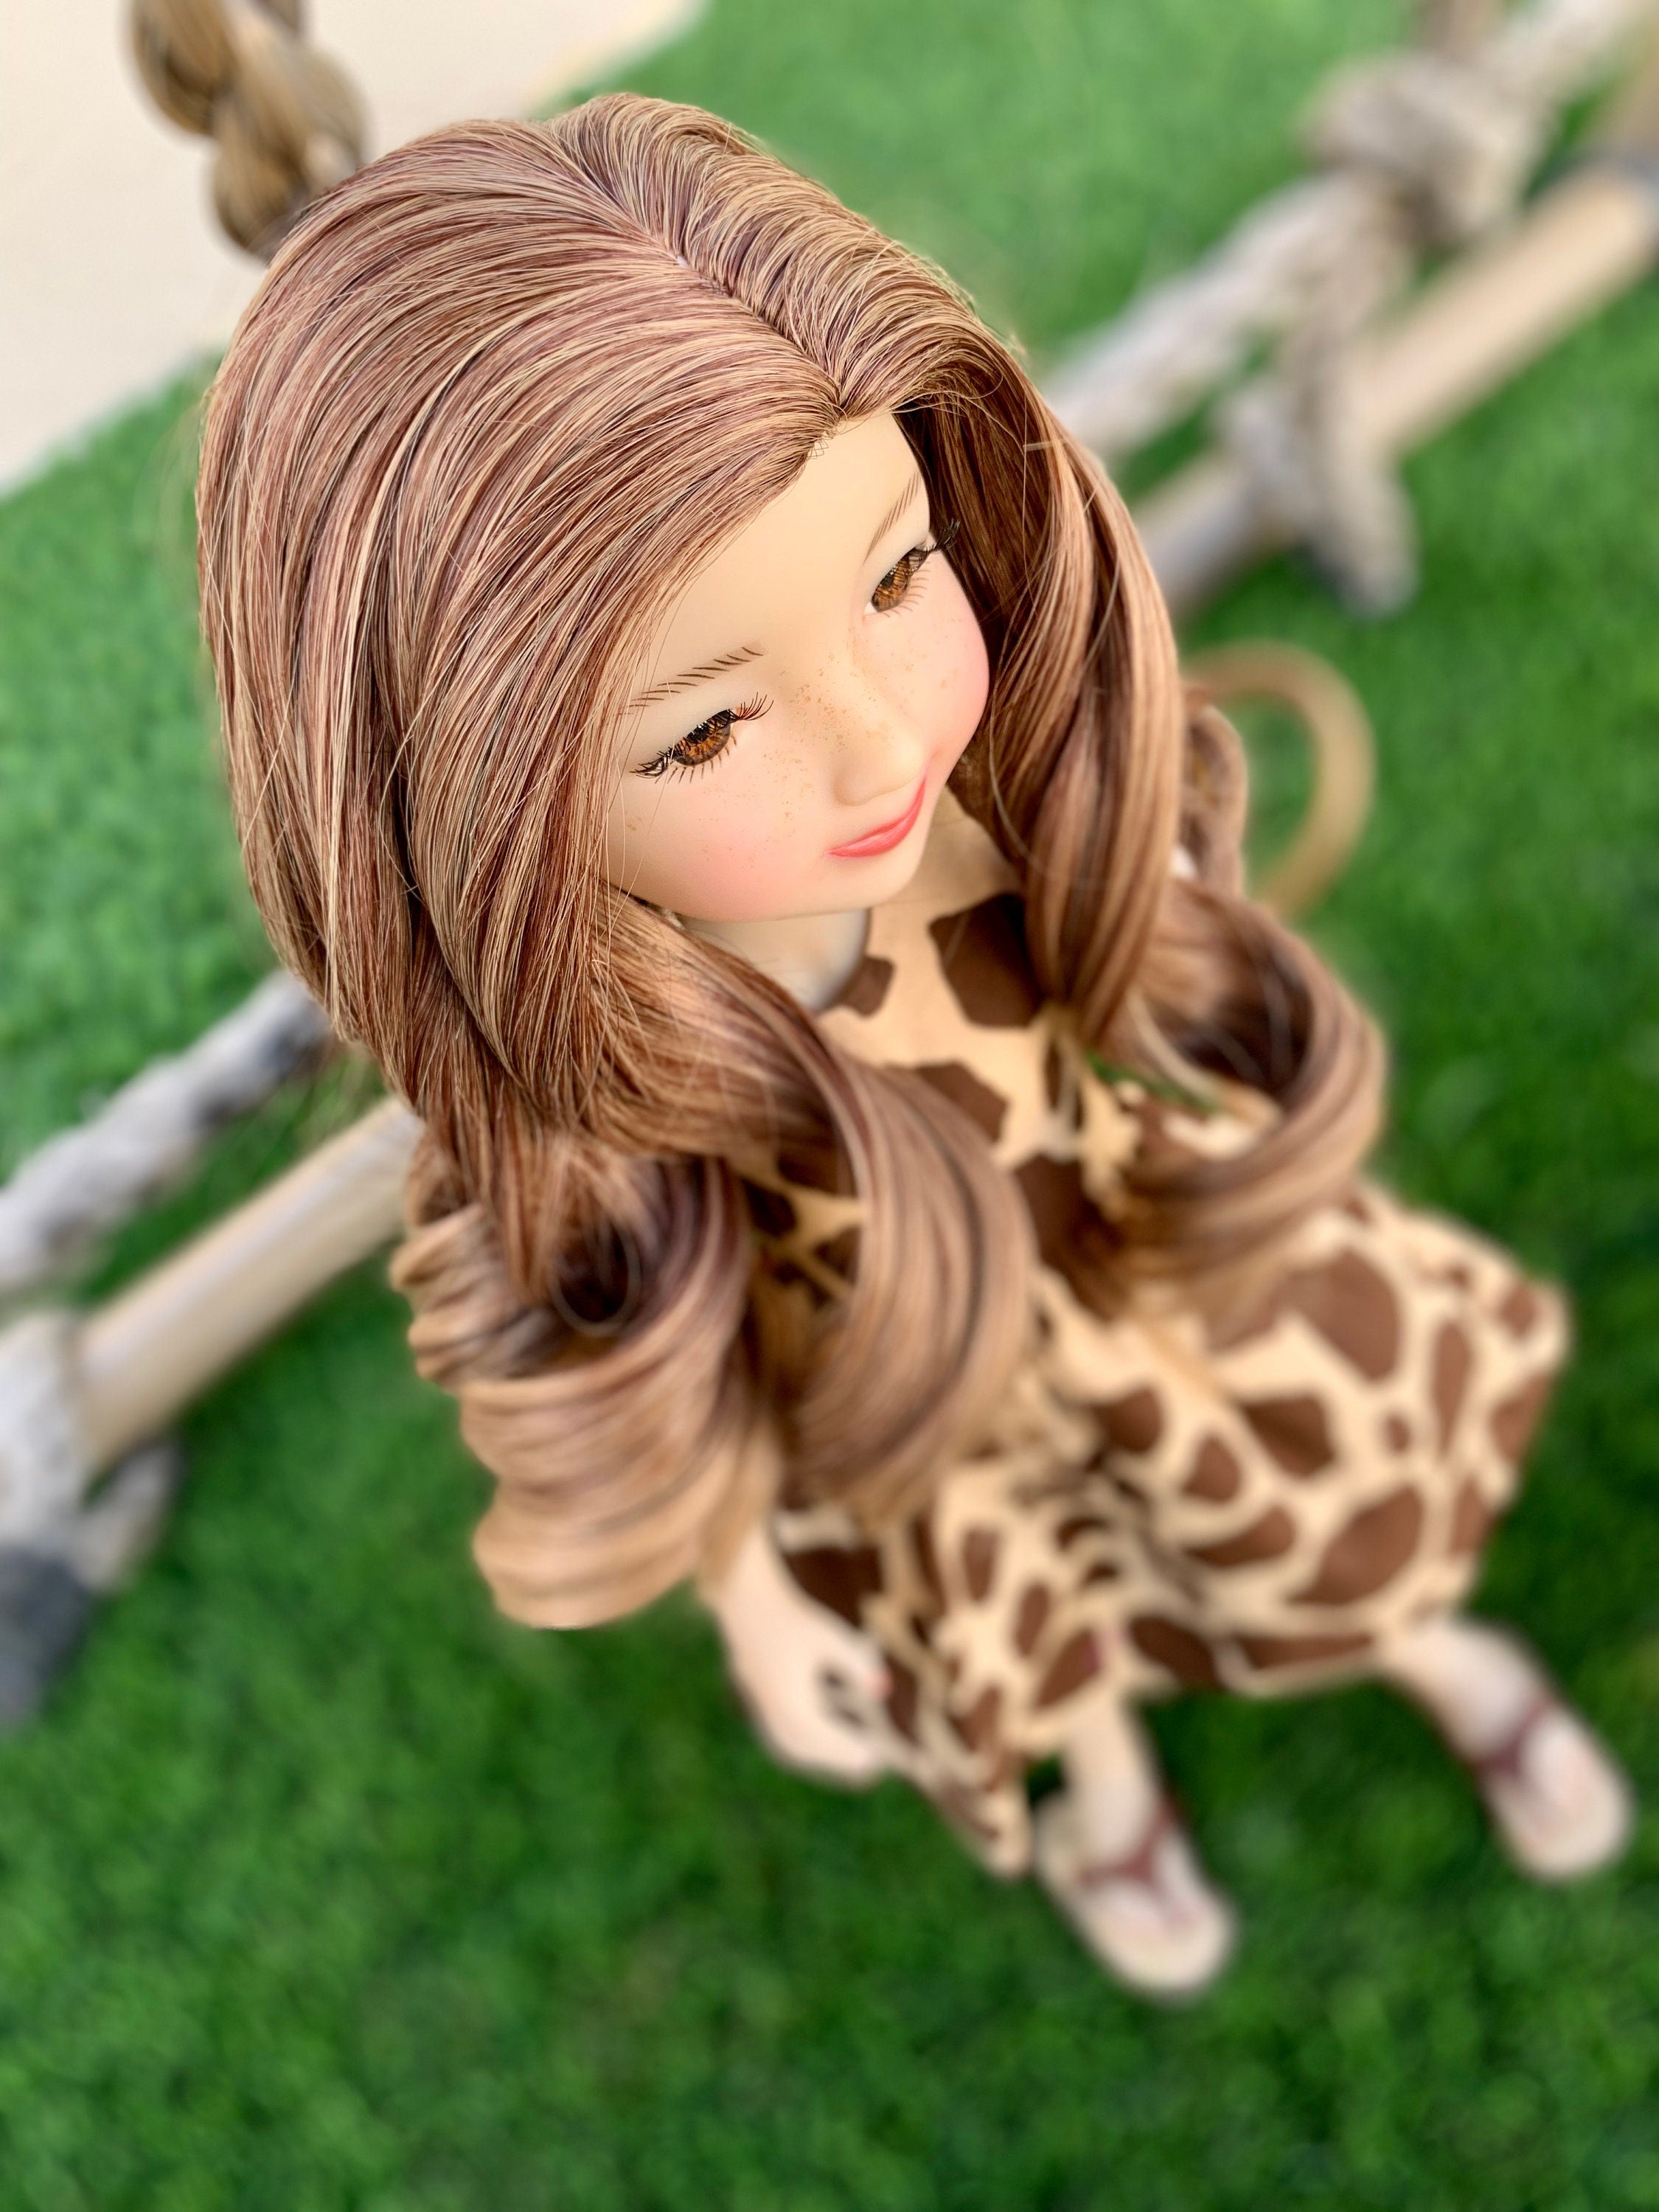 Custom doll WIG for 14" Dolls - Heat Safe-Tangle Resistant-fits 8-9" head size Kaye Wiggs Ruby Red Fashion Friends girls of the orient Ombre